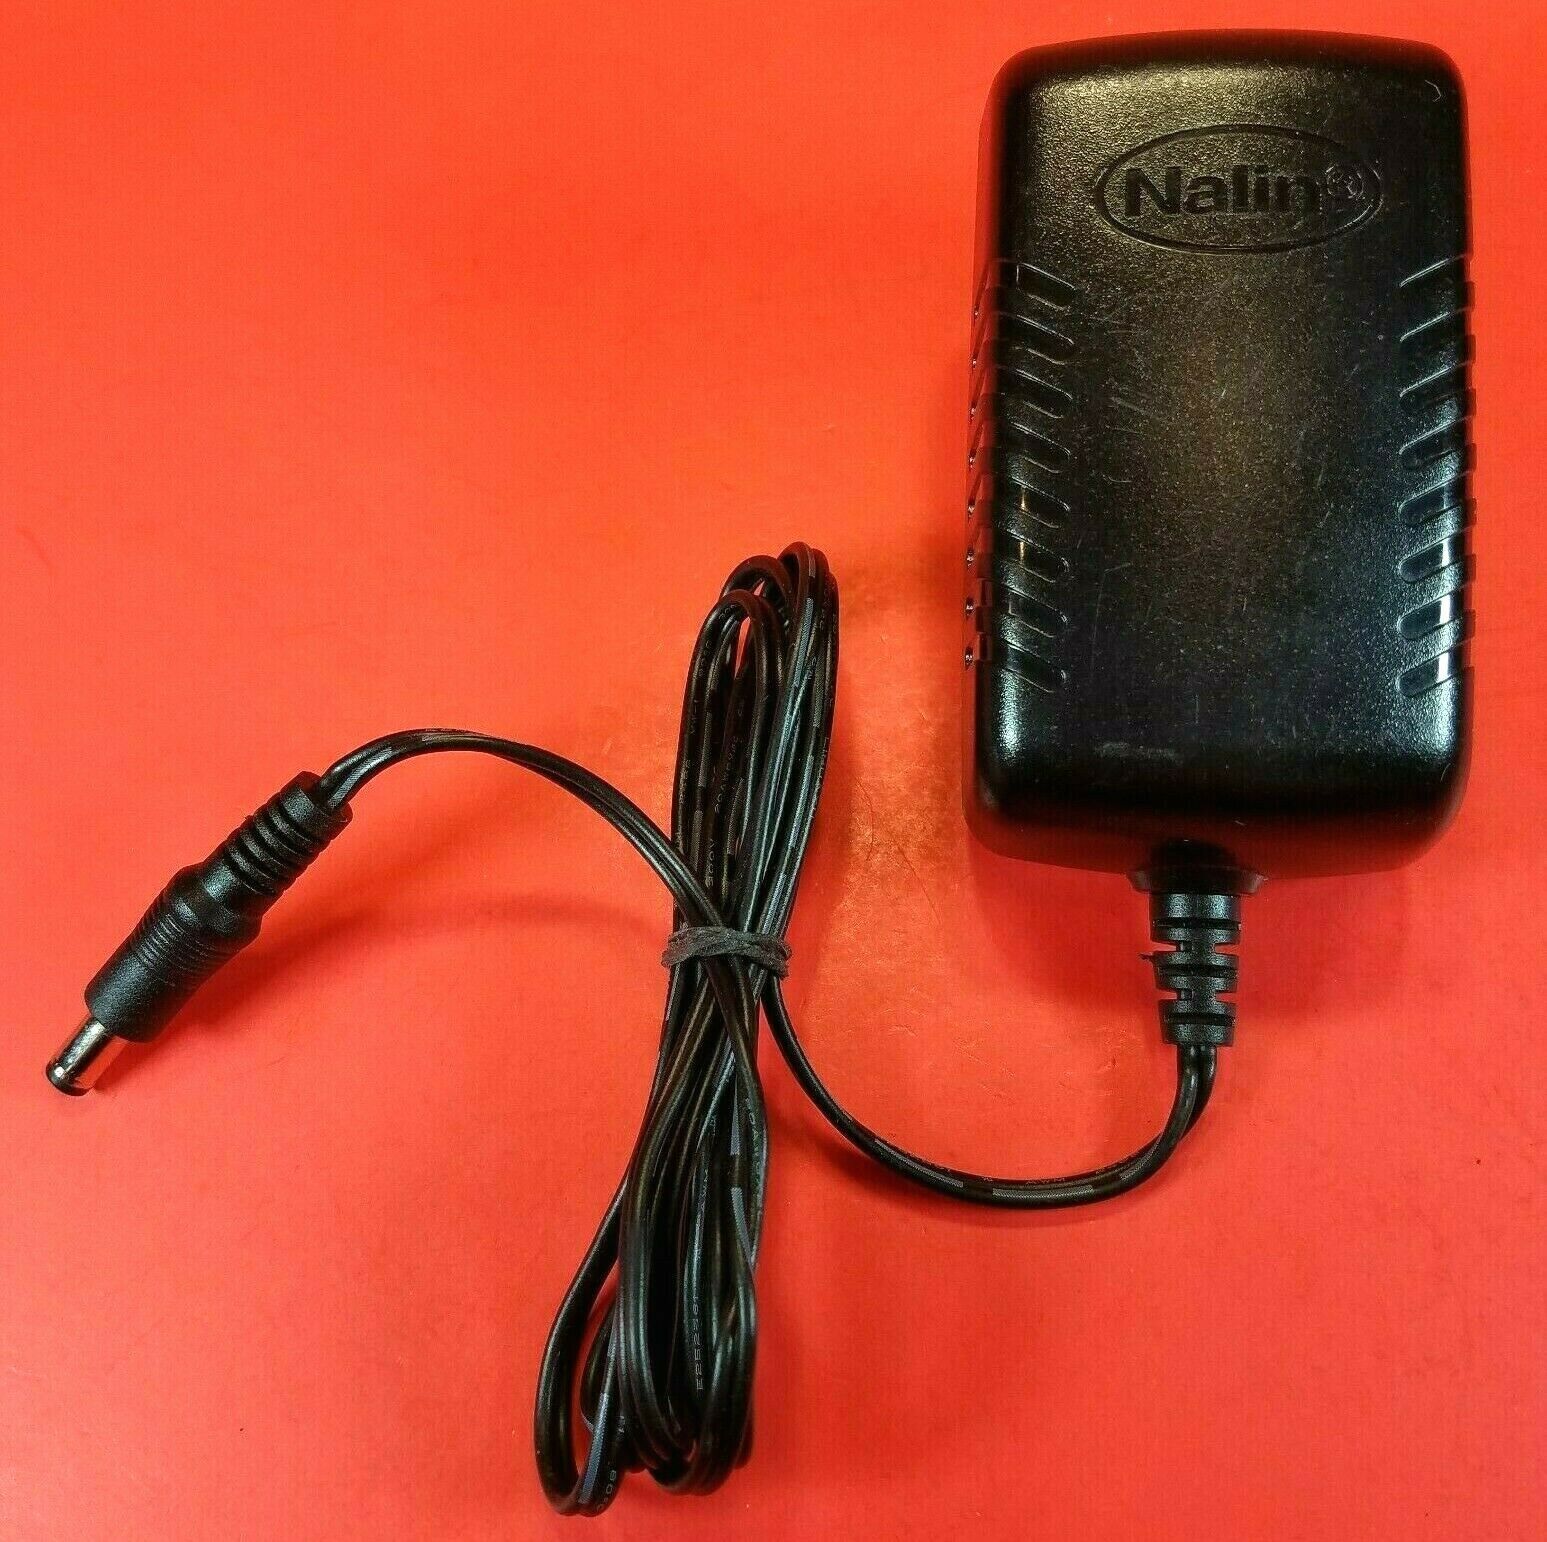 Genuine NALIN NLD150120W1C Power Supply Adaptor 12V 1.5A OEM AC/DC Adapter Cable Type: AC Adapter Output Voltage: 12 V